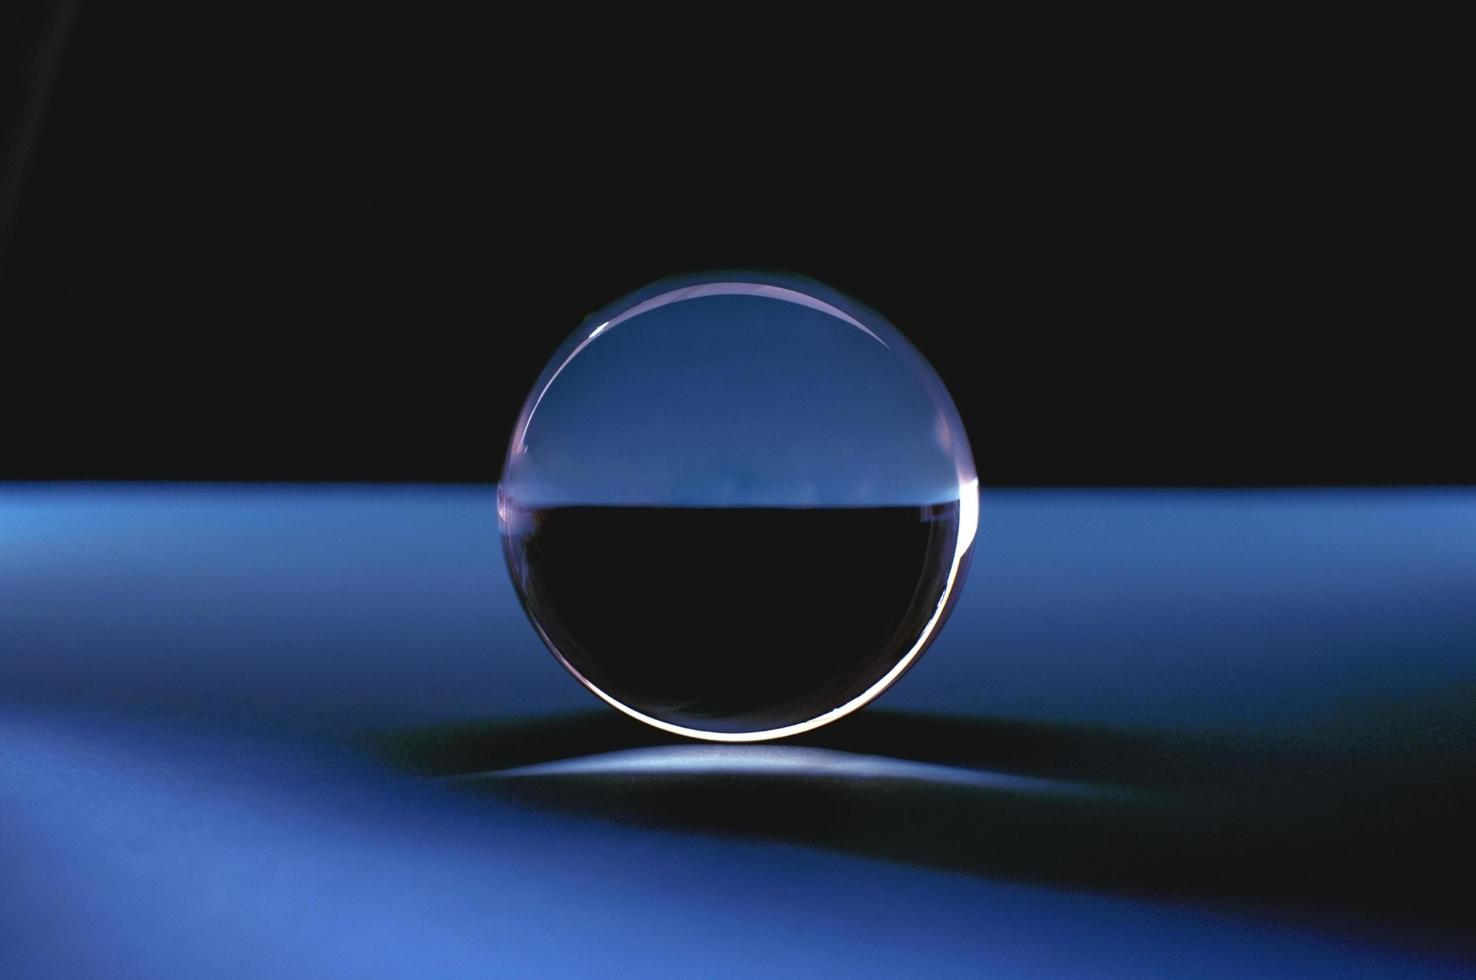 Abstact crystal ball in blue and black. photo